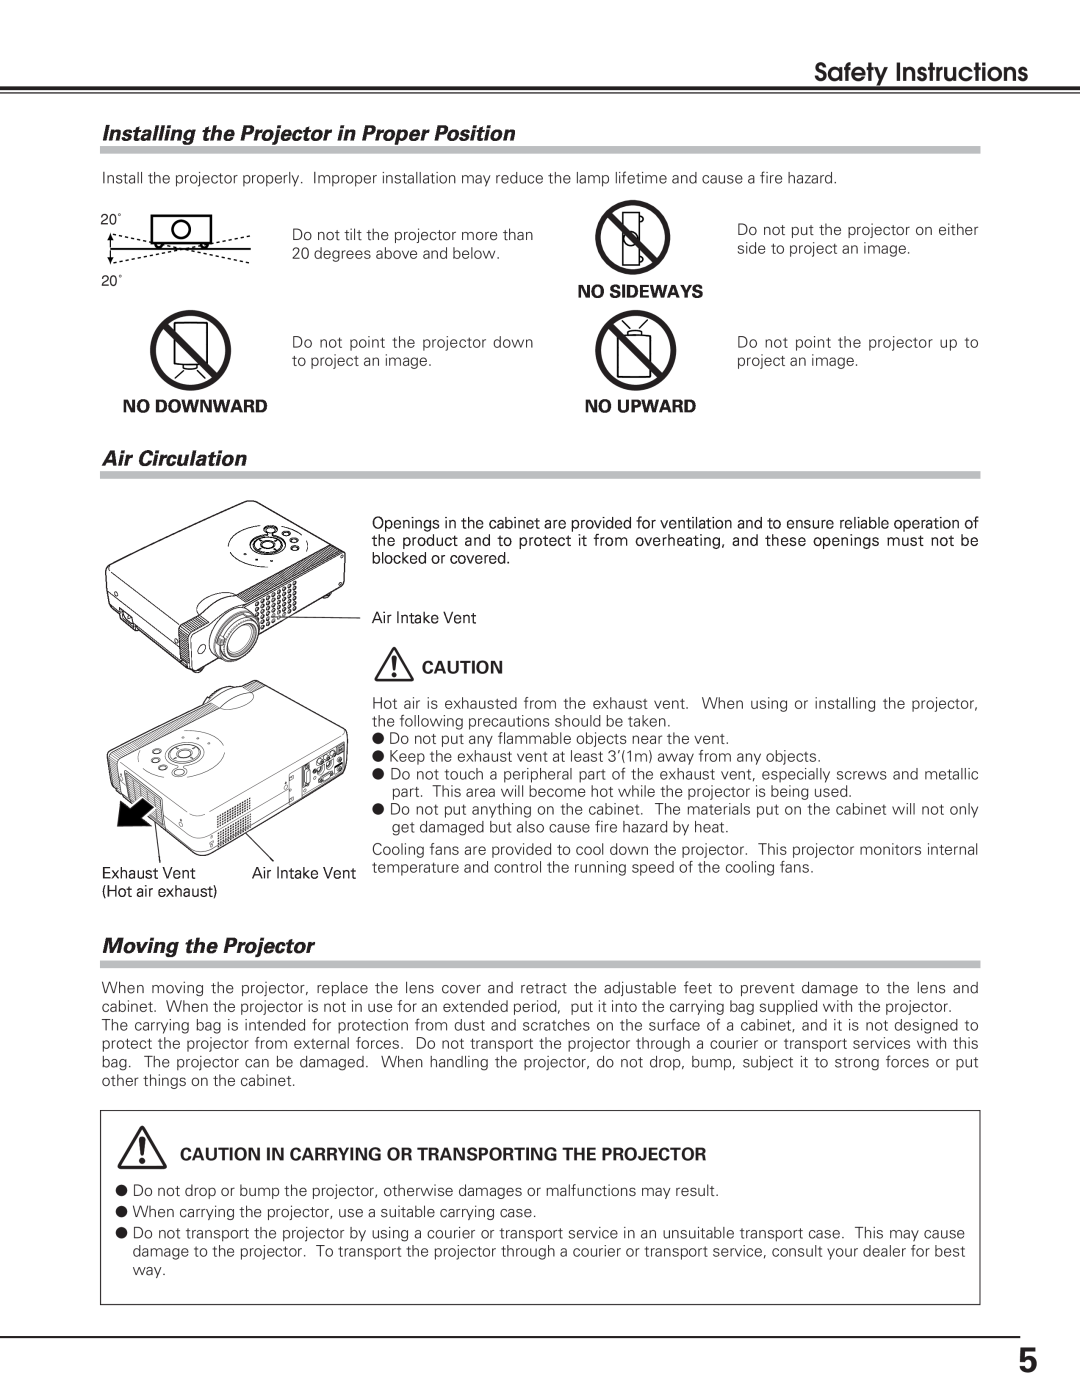 Sanyo PLC-SL20 Safety Instructions, Installing the Projector in Proper Position, Air Circulation, Moving the Projector 